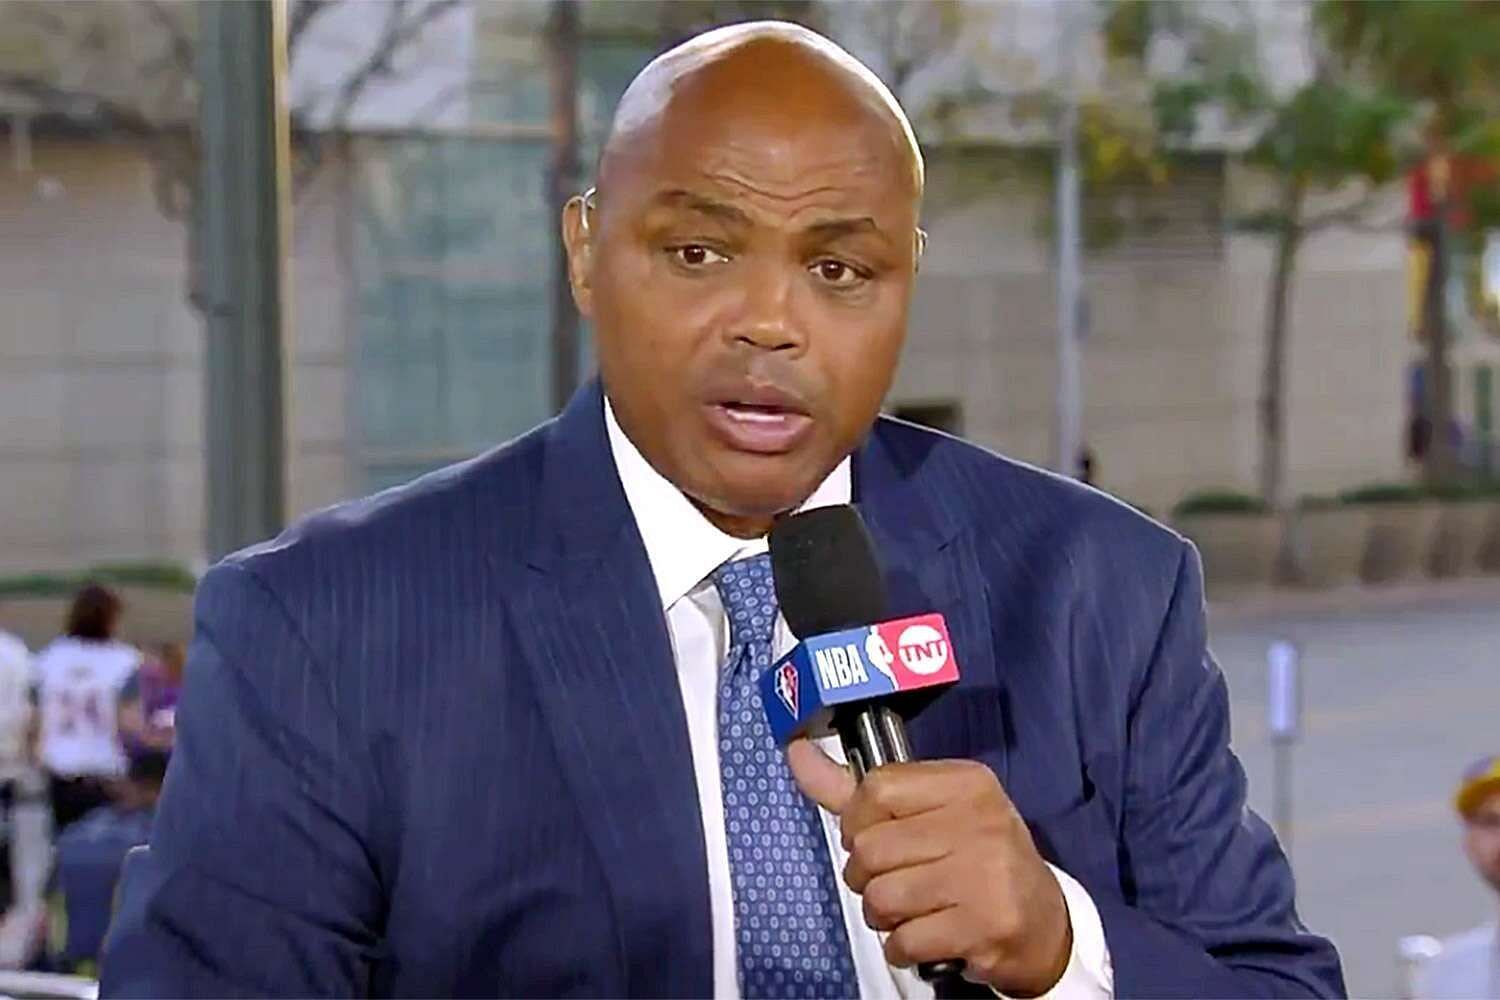 Charles Barkley is almost speechless at the number of reviews for flagrant fouls in the series between the Golden State Warriors and Memphis Grizzlies. [Photo: People.com]